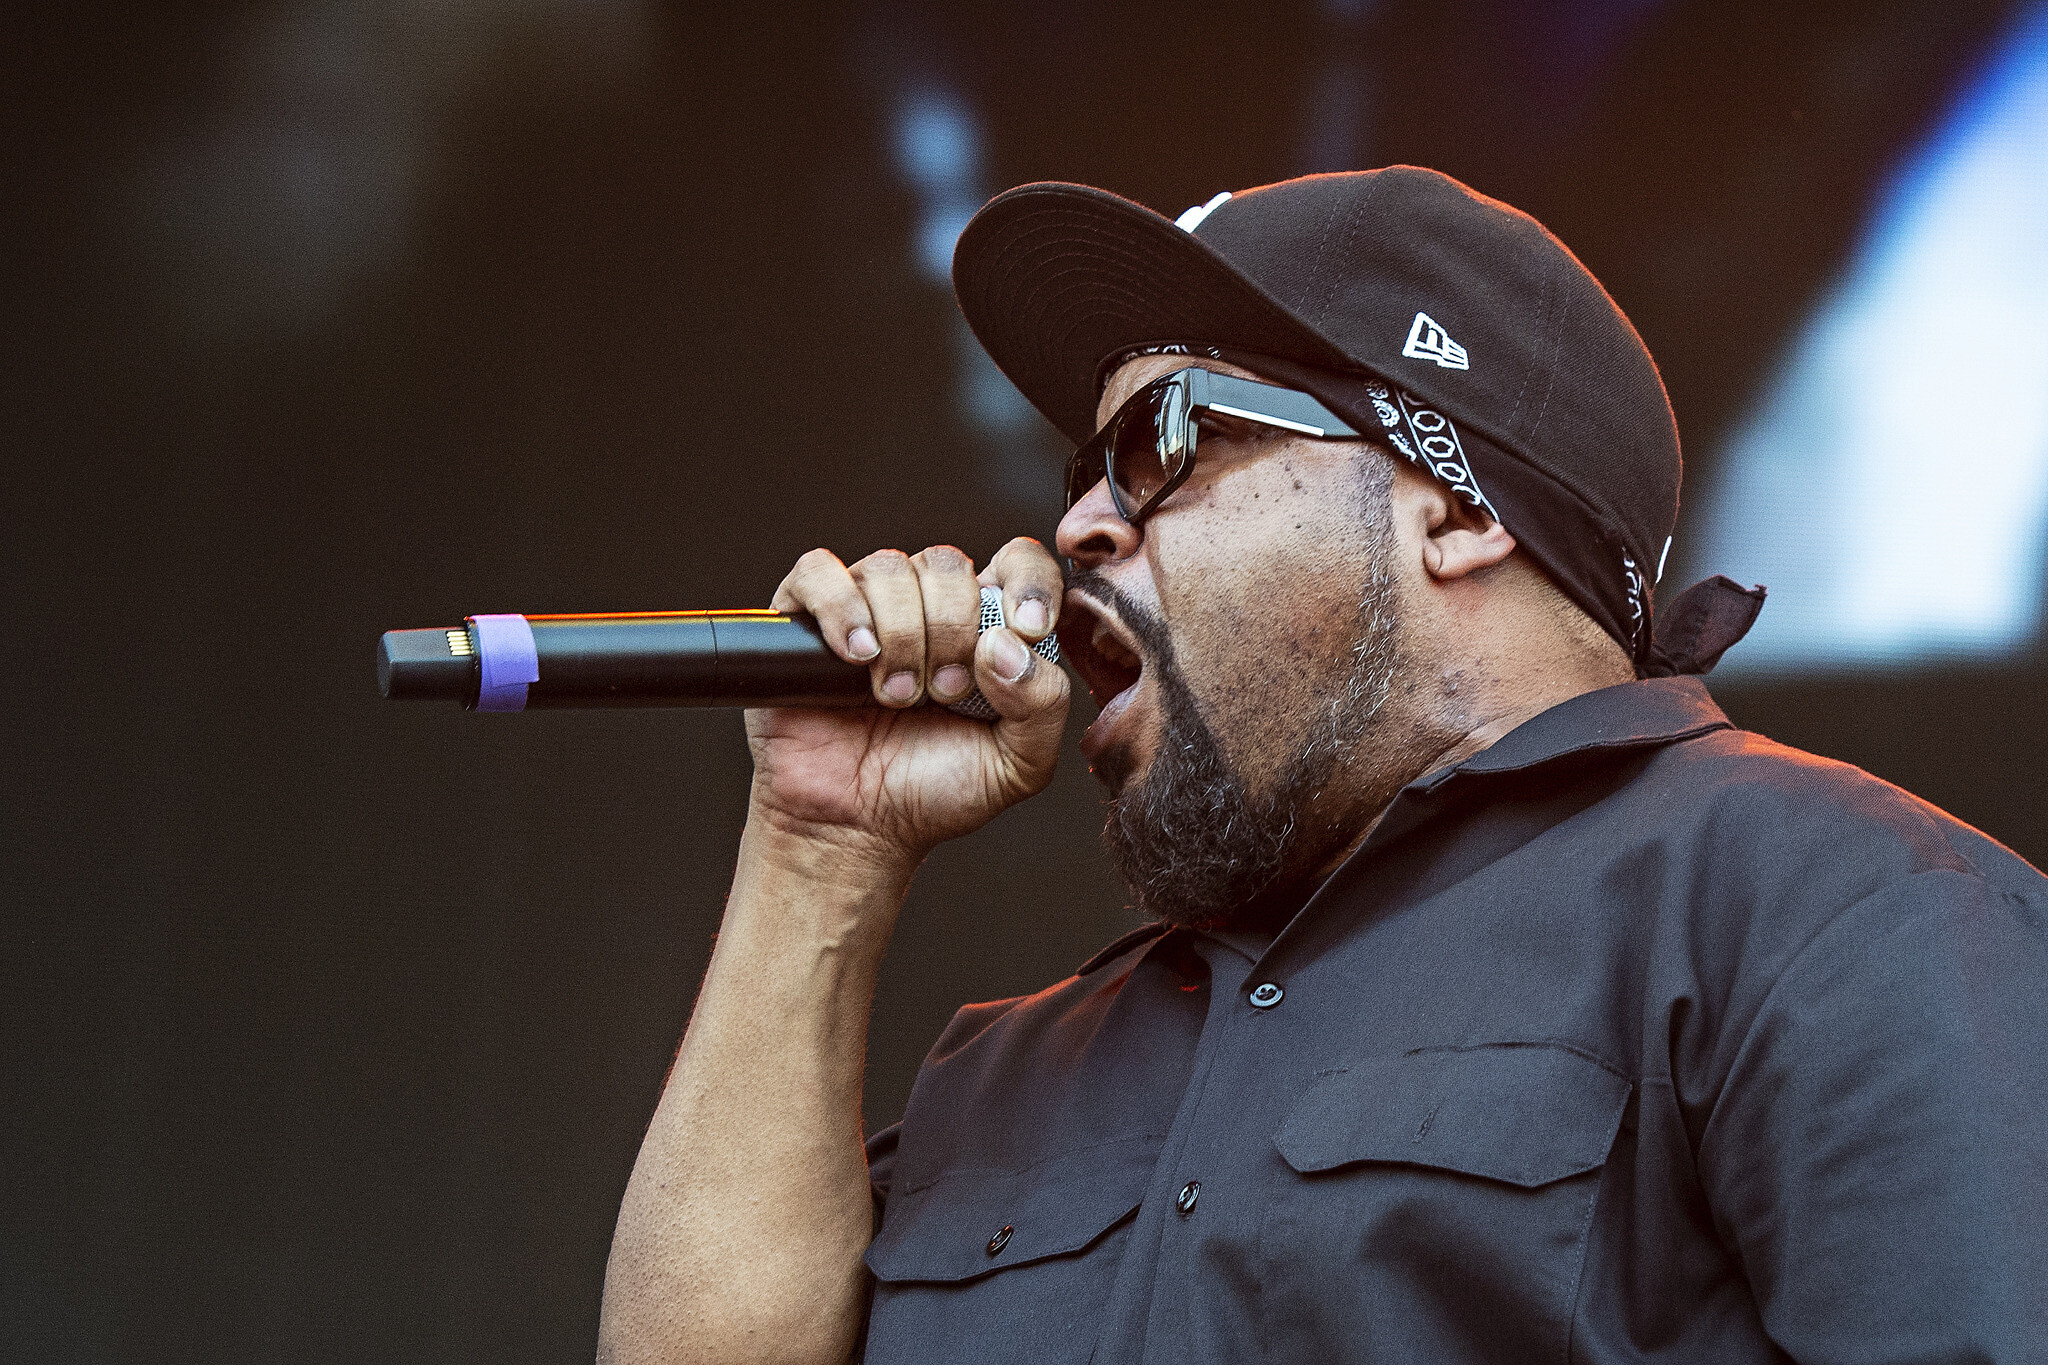 Ice Cube to headline ZOA gala months after antiSemitic tweets The